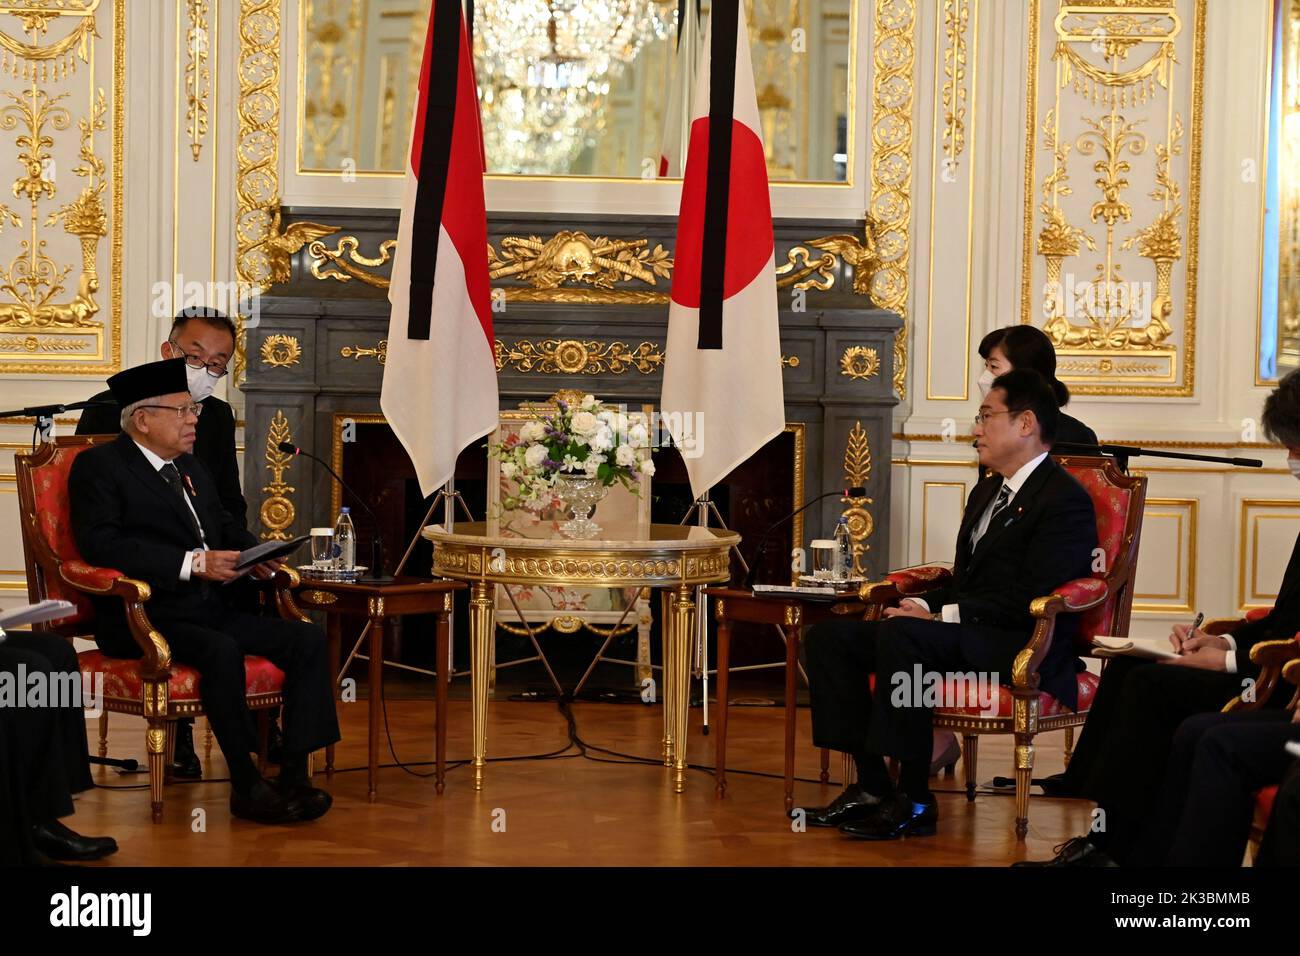 TOKYO, JAPAN - SEPTEMBER 26 : KH. Ma'ruf Amin, Vice President of Indonesia (L) and Japan's Prime Minister Fumio Kishida (R) talk during the Japan-Indonesia bilateral meeting at Akasaka Palace State Guest House in Tokyo, Japan on September 26, 2022 in Tokyo, Japan. KH. Ma'ruf Amin is visiting Japan within the state funeral for former Prime Minister Shinzo Abe that will be held on September 27, in the capital of Japan. David Mareuil/Pool via REUTERS Stock Photo